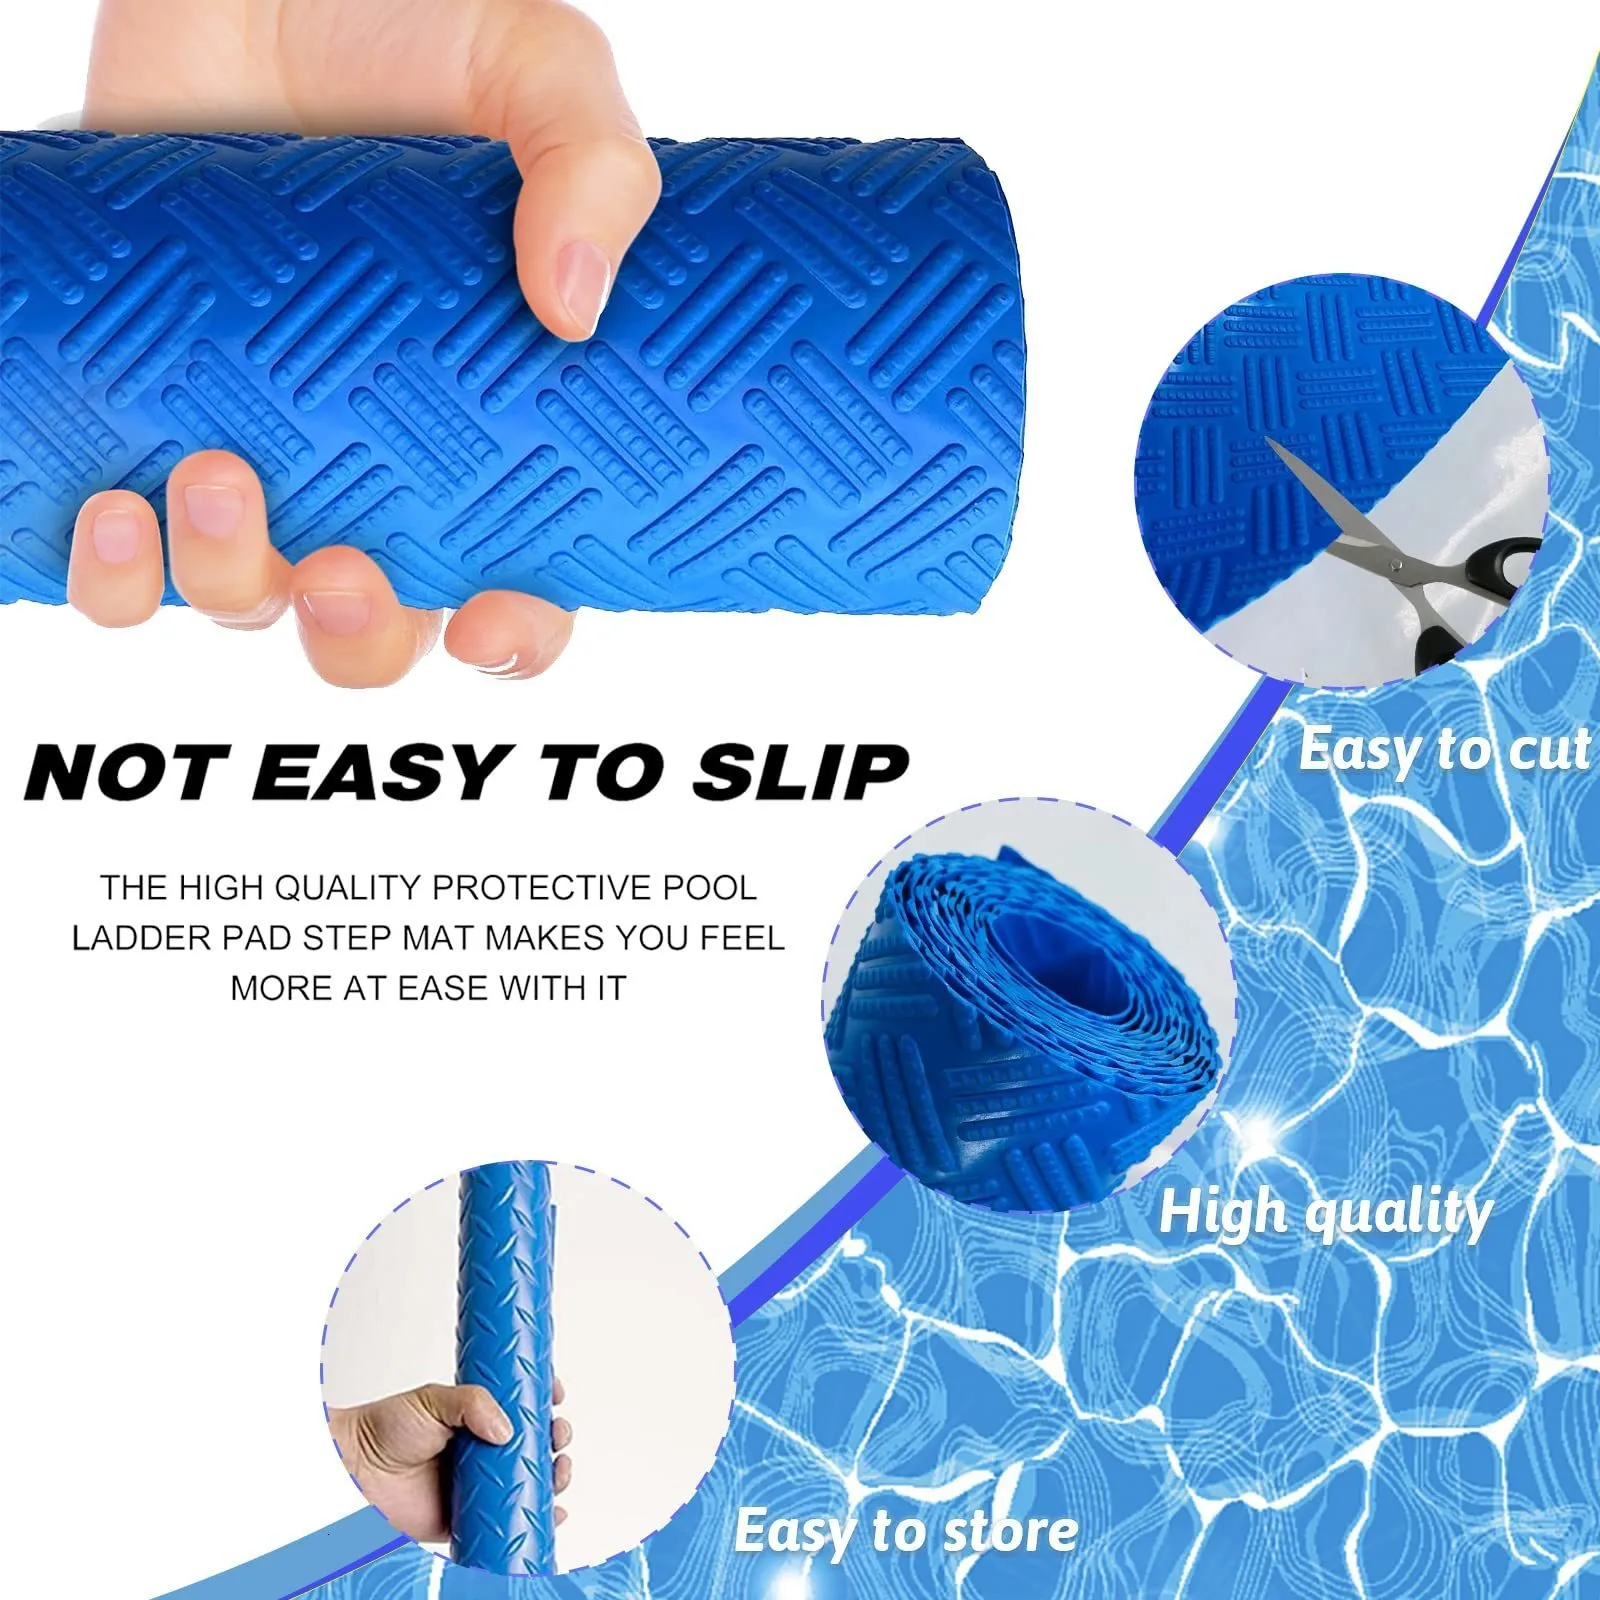 Blue Anti Slip Pool Ladder Mats With Texture Protection In Hindi 2 Designs  Available From Wai10, $10.71